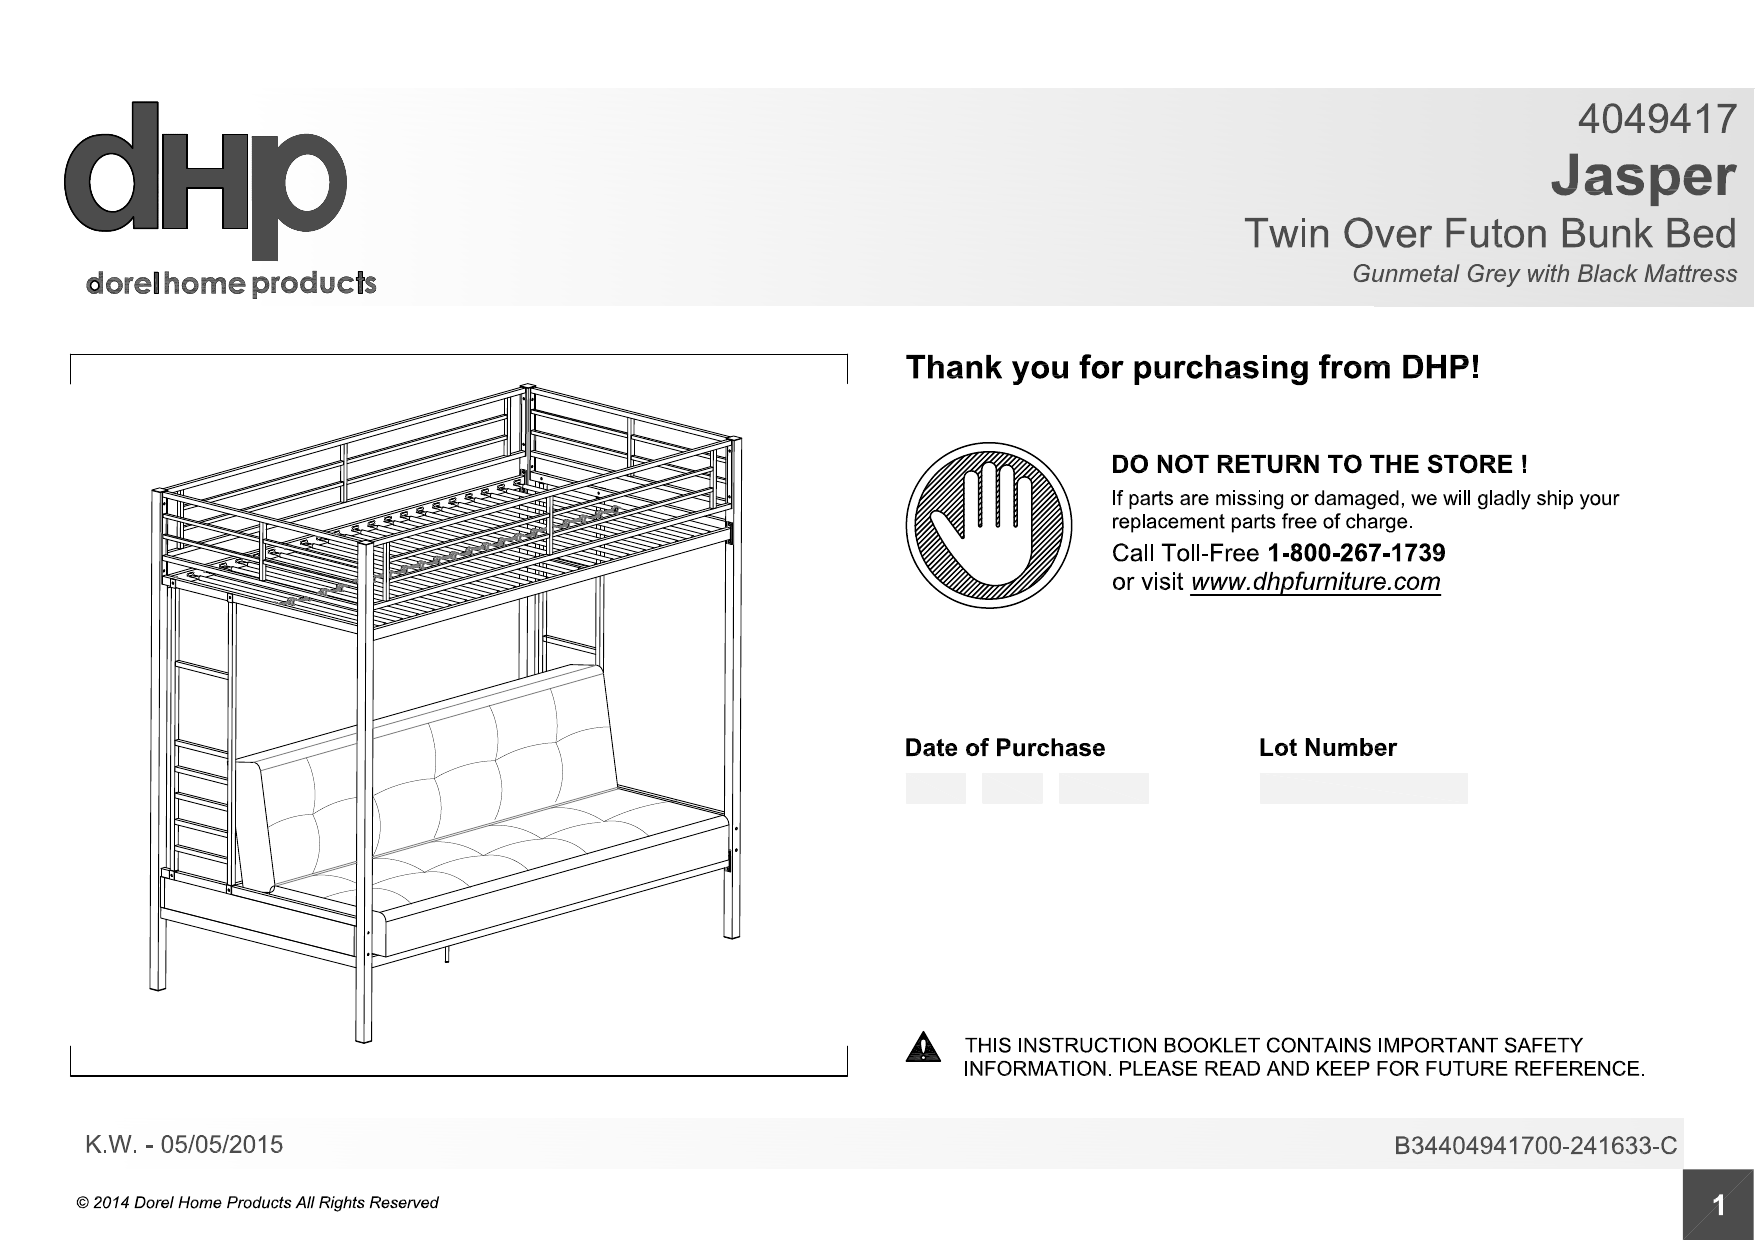 Dorel Home Furnishings 4049417 Owners, Dorel Twin Over Futon Bunk Bed Instructions